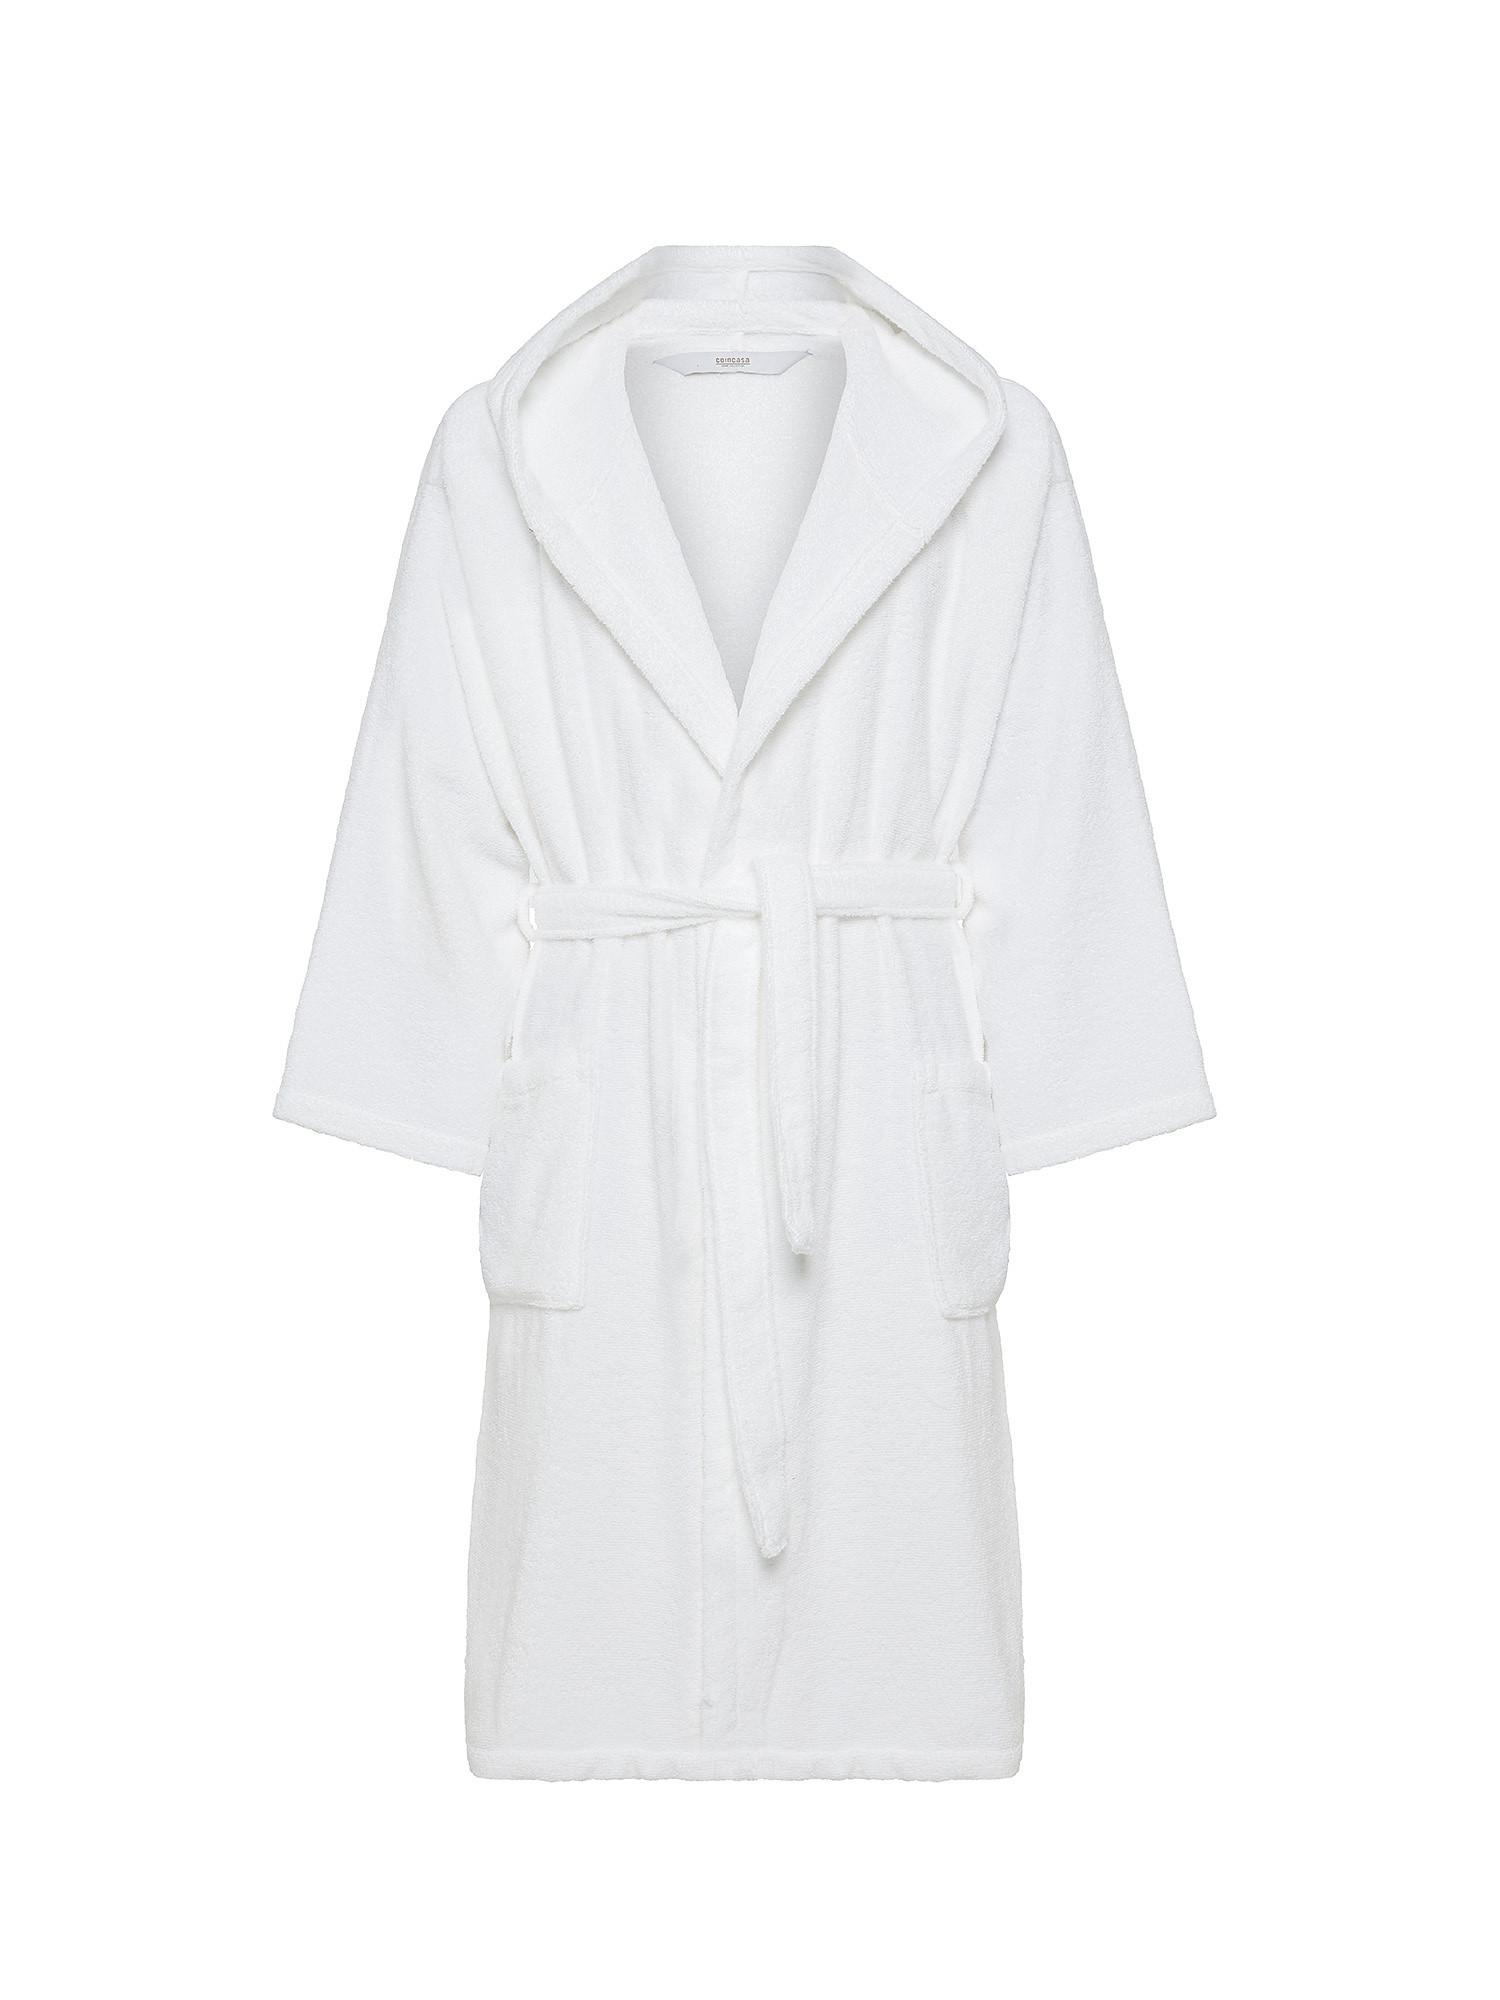 Bathrobe with hood in solid color pure cotton terry, White, large image number 0